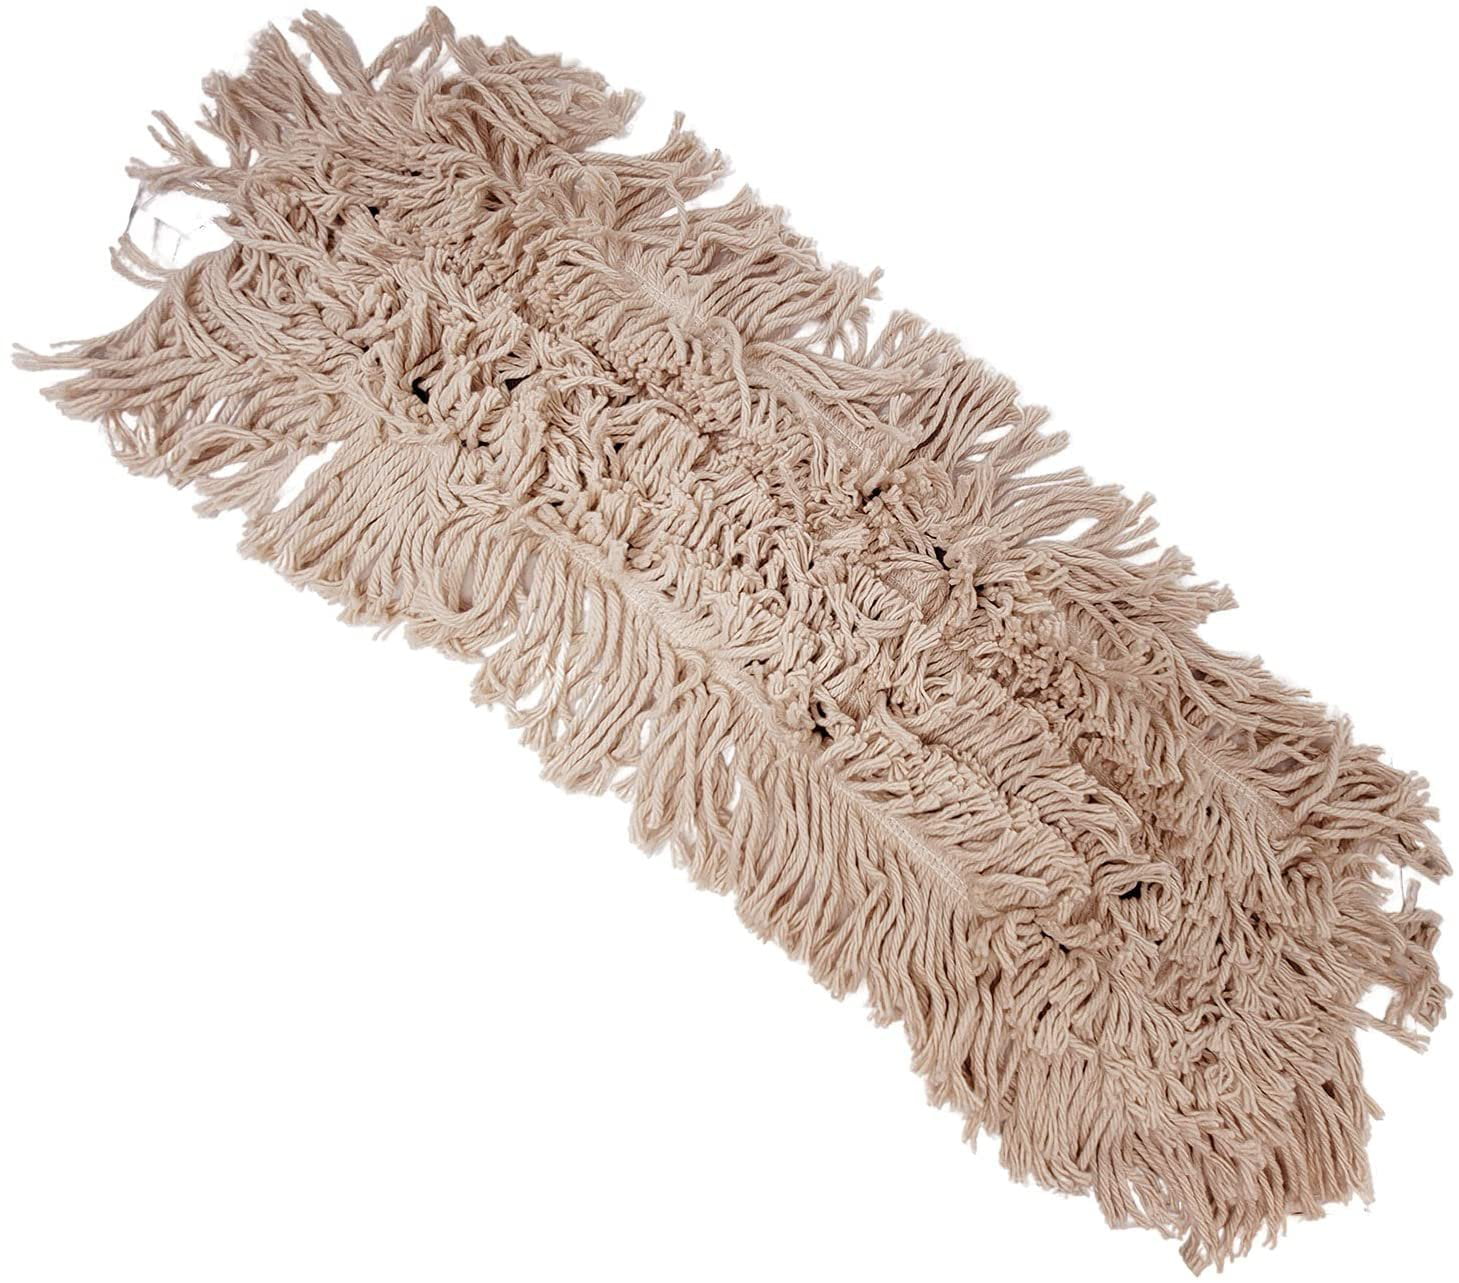 Extra Absorbent Cotton Mop Head 4 Sizes Cleaning Mop Refill String Heavy Duty !! 